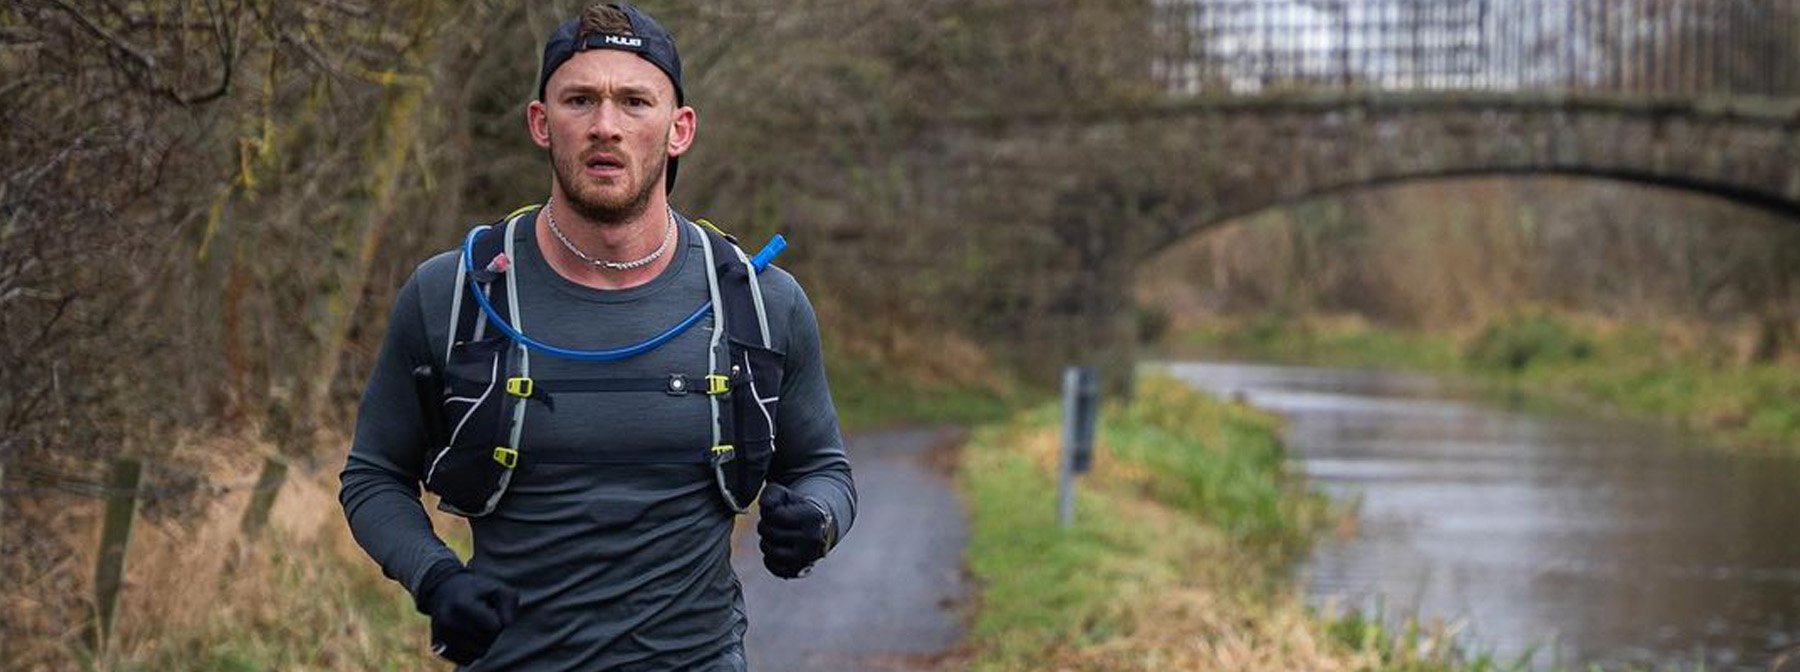 How To Run A Faster 5k With Hybrid Athlete Fergus Crawley